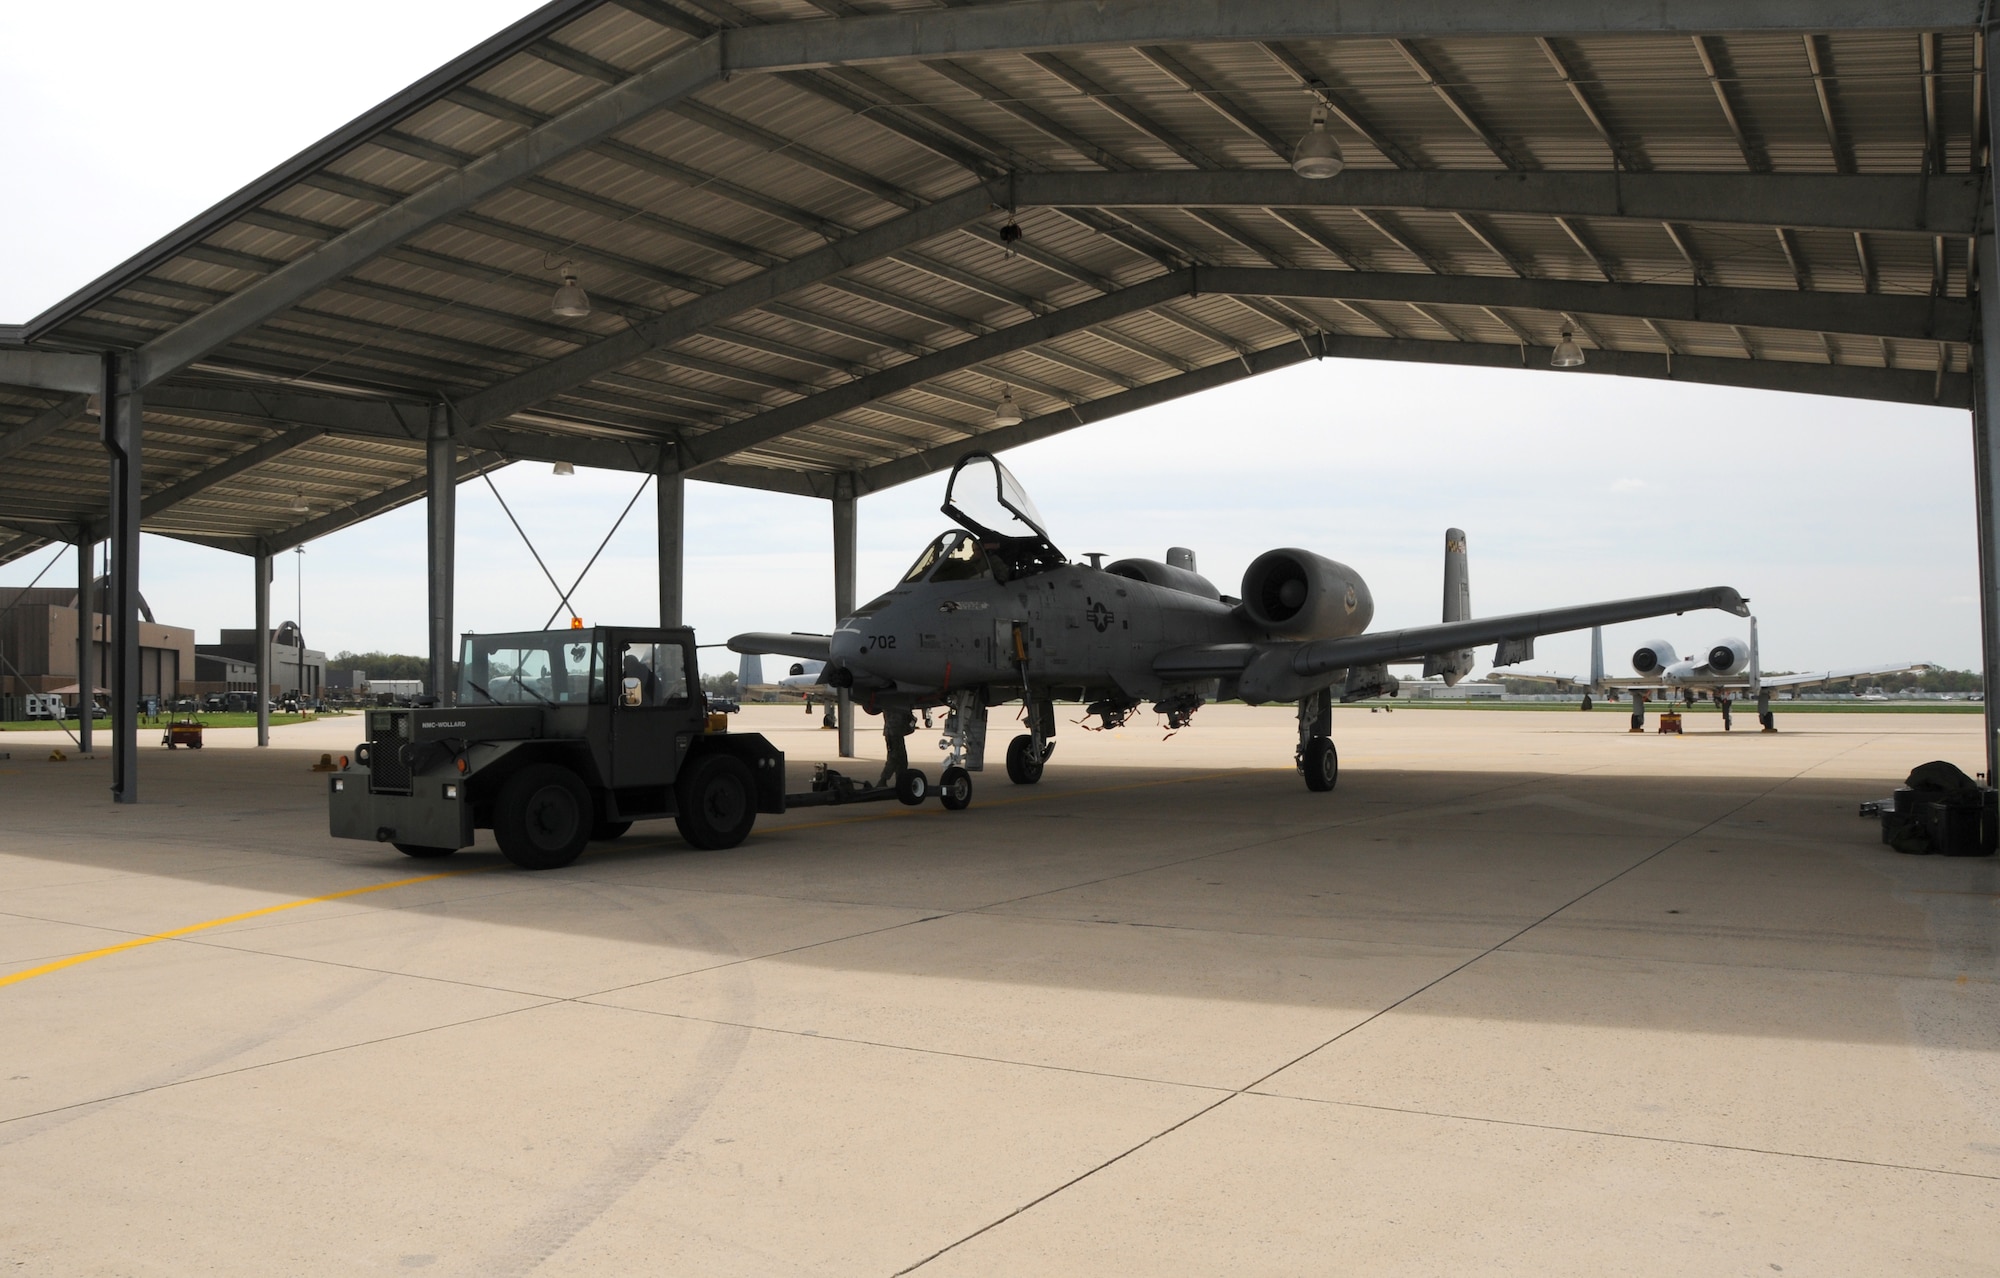 The first A-10C Thunderbolt II attack jet towed under the new sunshades installed at the Maryland Air National Guard, 175th Wing at Warfield Air National Guard Base in Baltimore, Md., April 21, 2011.  The sunshades are design to help keep maintenance costs down. The shades will also protect the aircraft from rain, hail, snow and UV rays that can deteriorate gaskets, rubber seals, paint and other items costing more to maintain aircraft. 
(U.S. Air Force photo by Master Sgt. Ed Bard/Released) 
